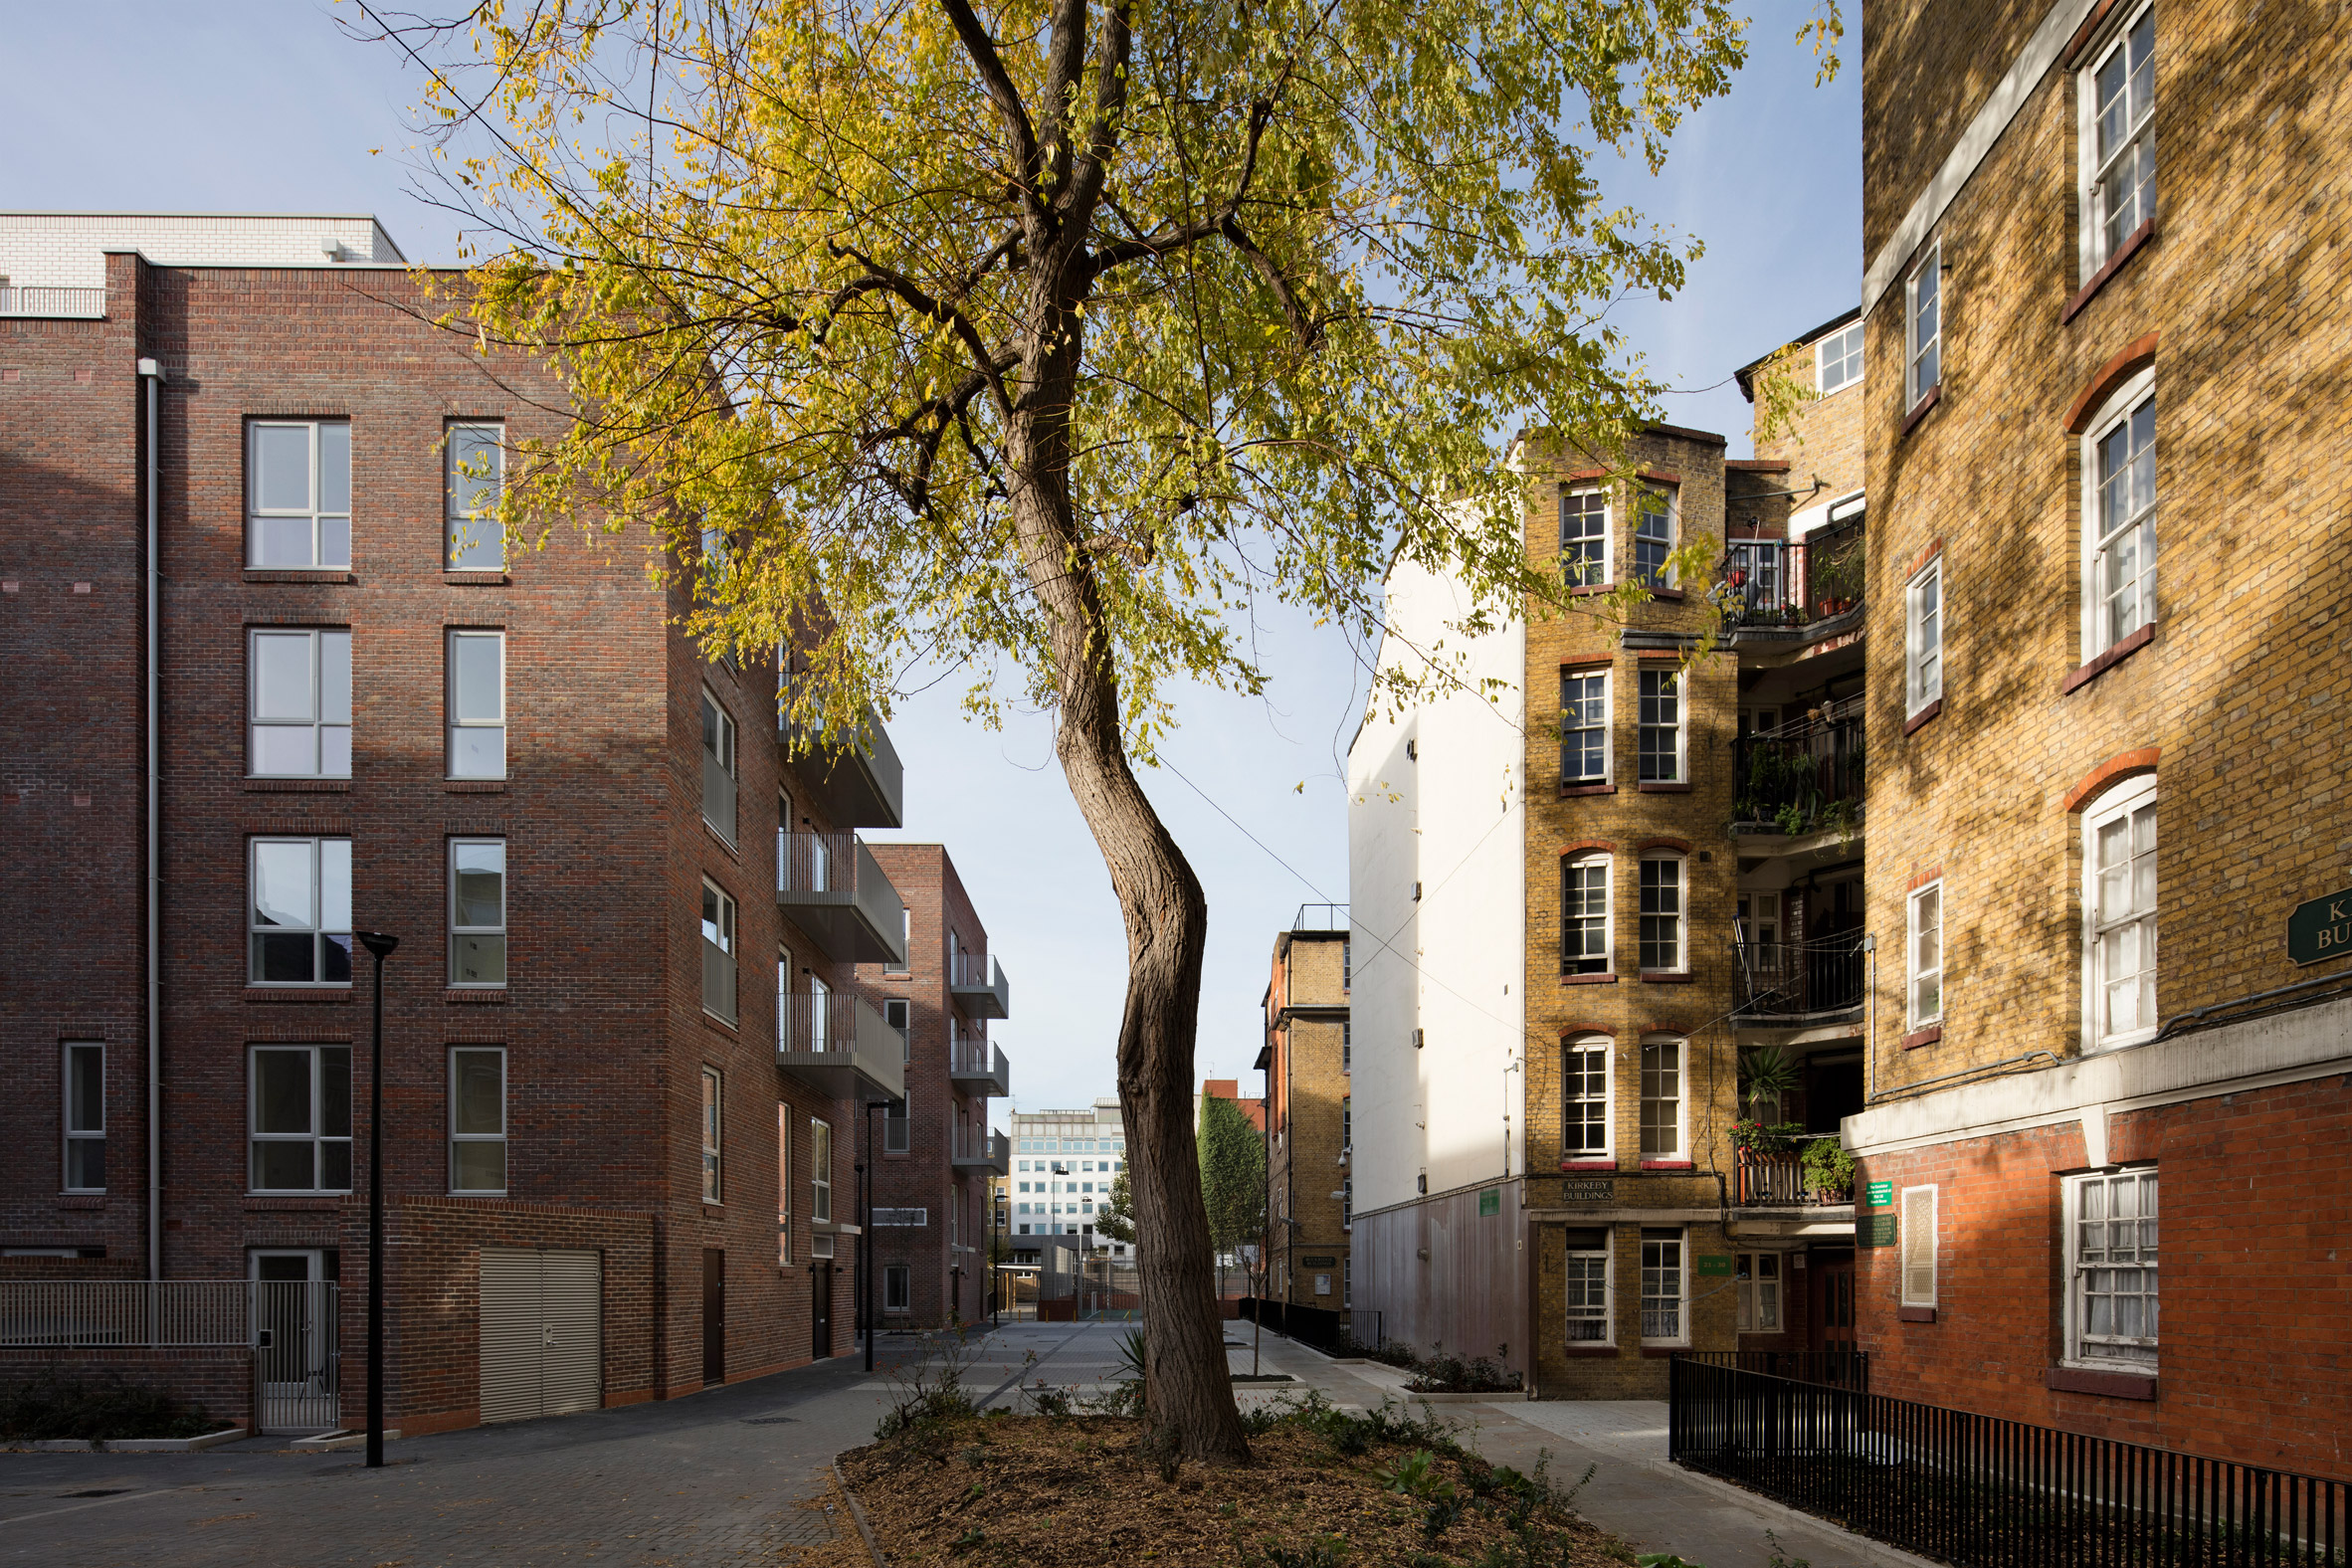 Street view of the social housing estate in London by Matthew Lloyd Architects